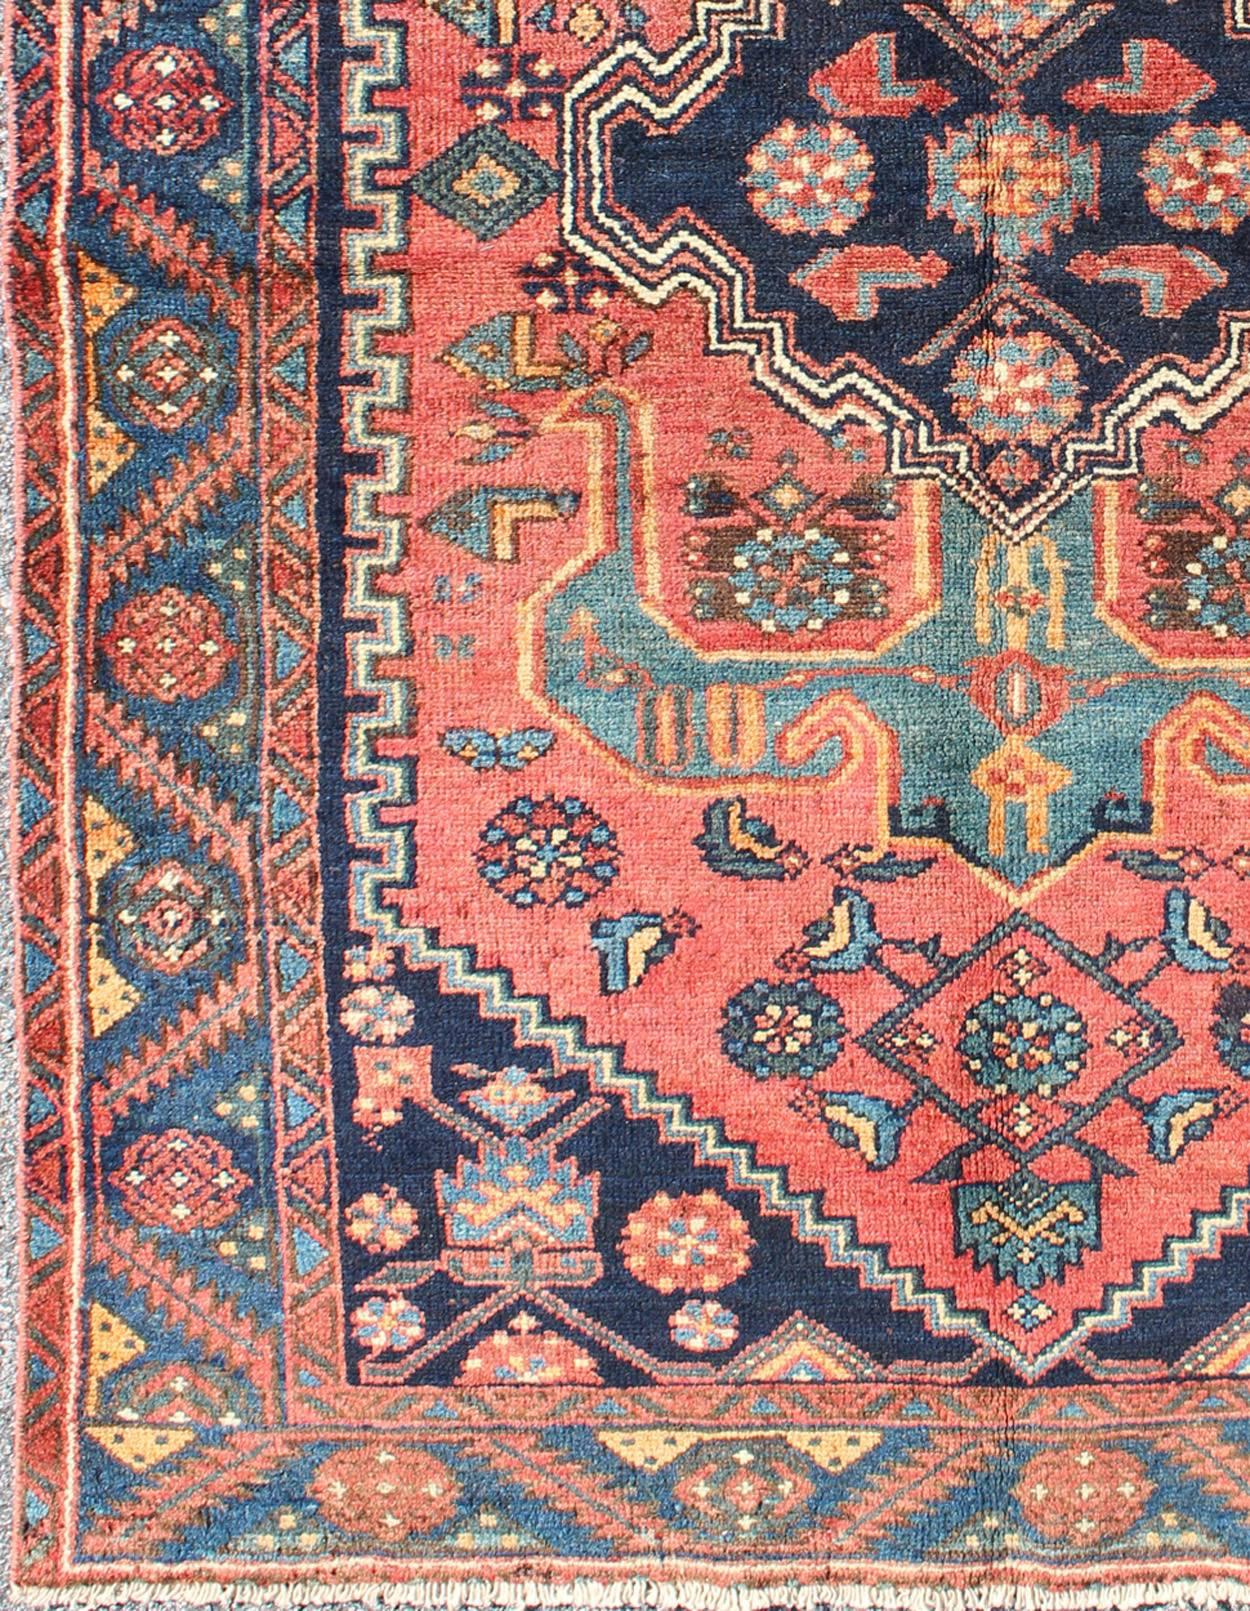 This antique Persian Malayer rug features a center medallion and jewel-toned geometric design.
Measures: 3'10 x 6.
List Price   $3,900
Sale Price $1,650